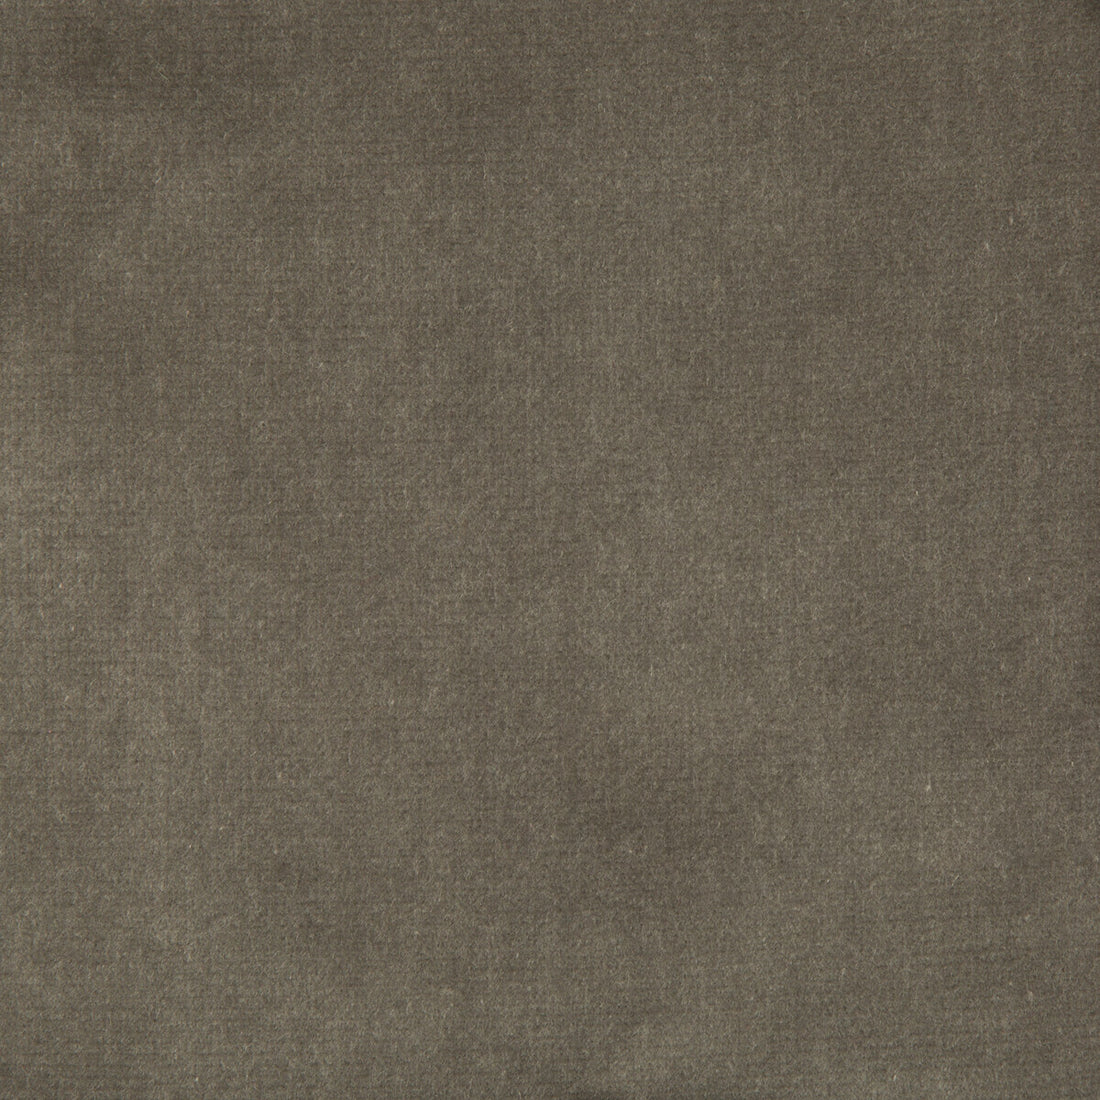 Velvet Treat fabric in grey color - pattern 33062.11.0 - by Kravet Couture in the Modern Colors III collection